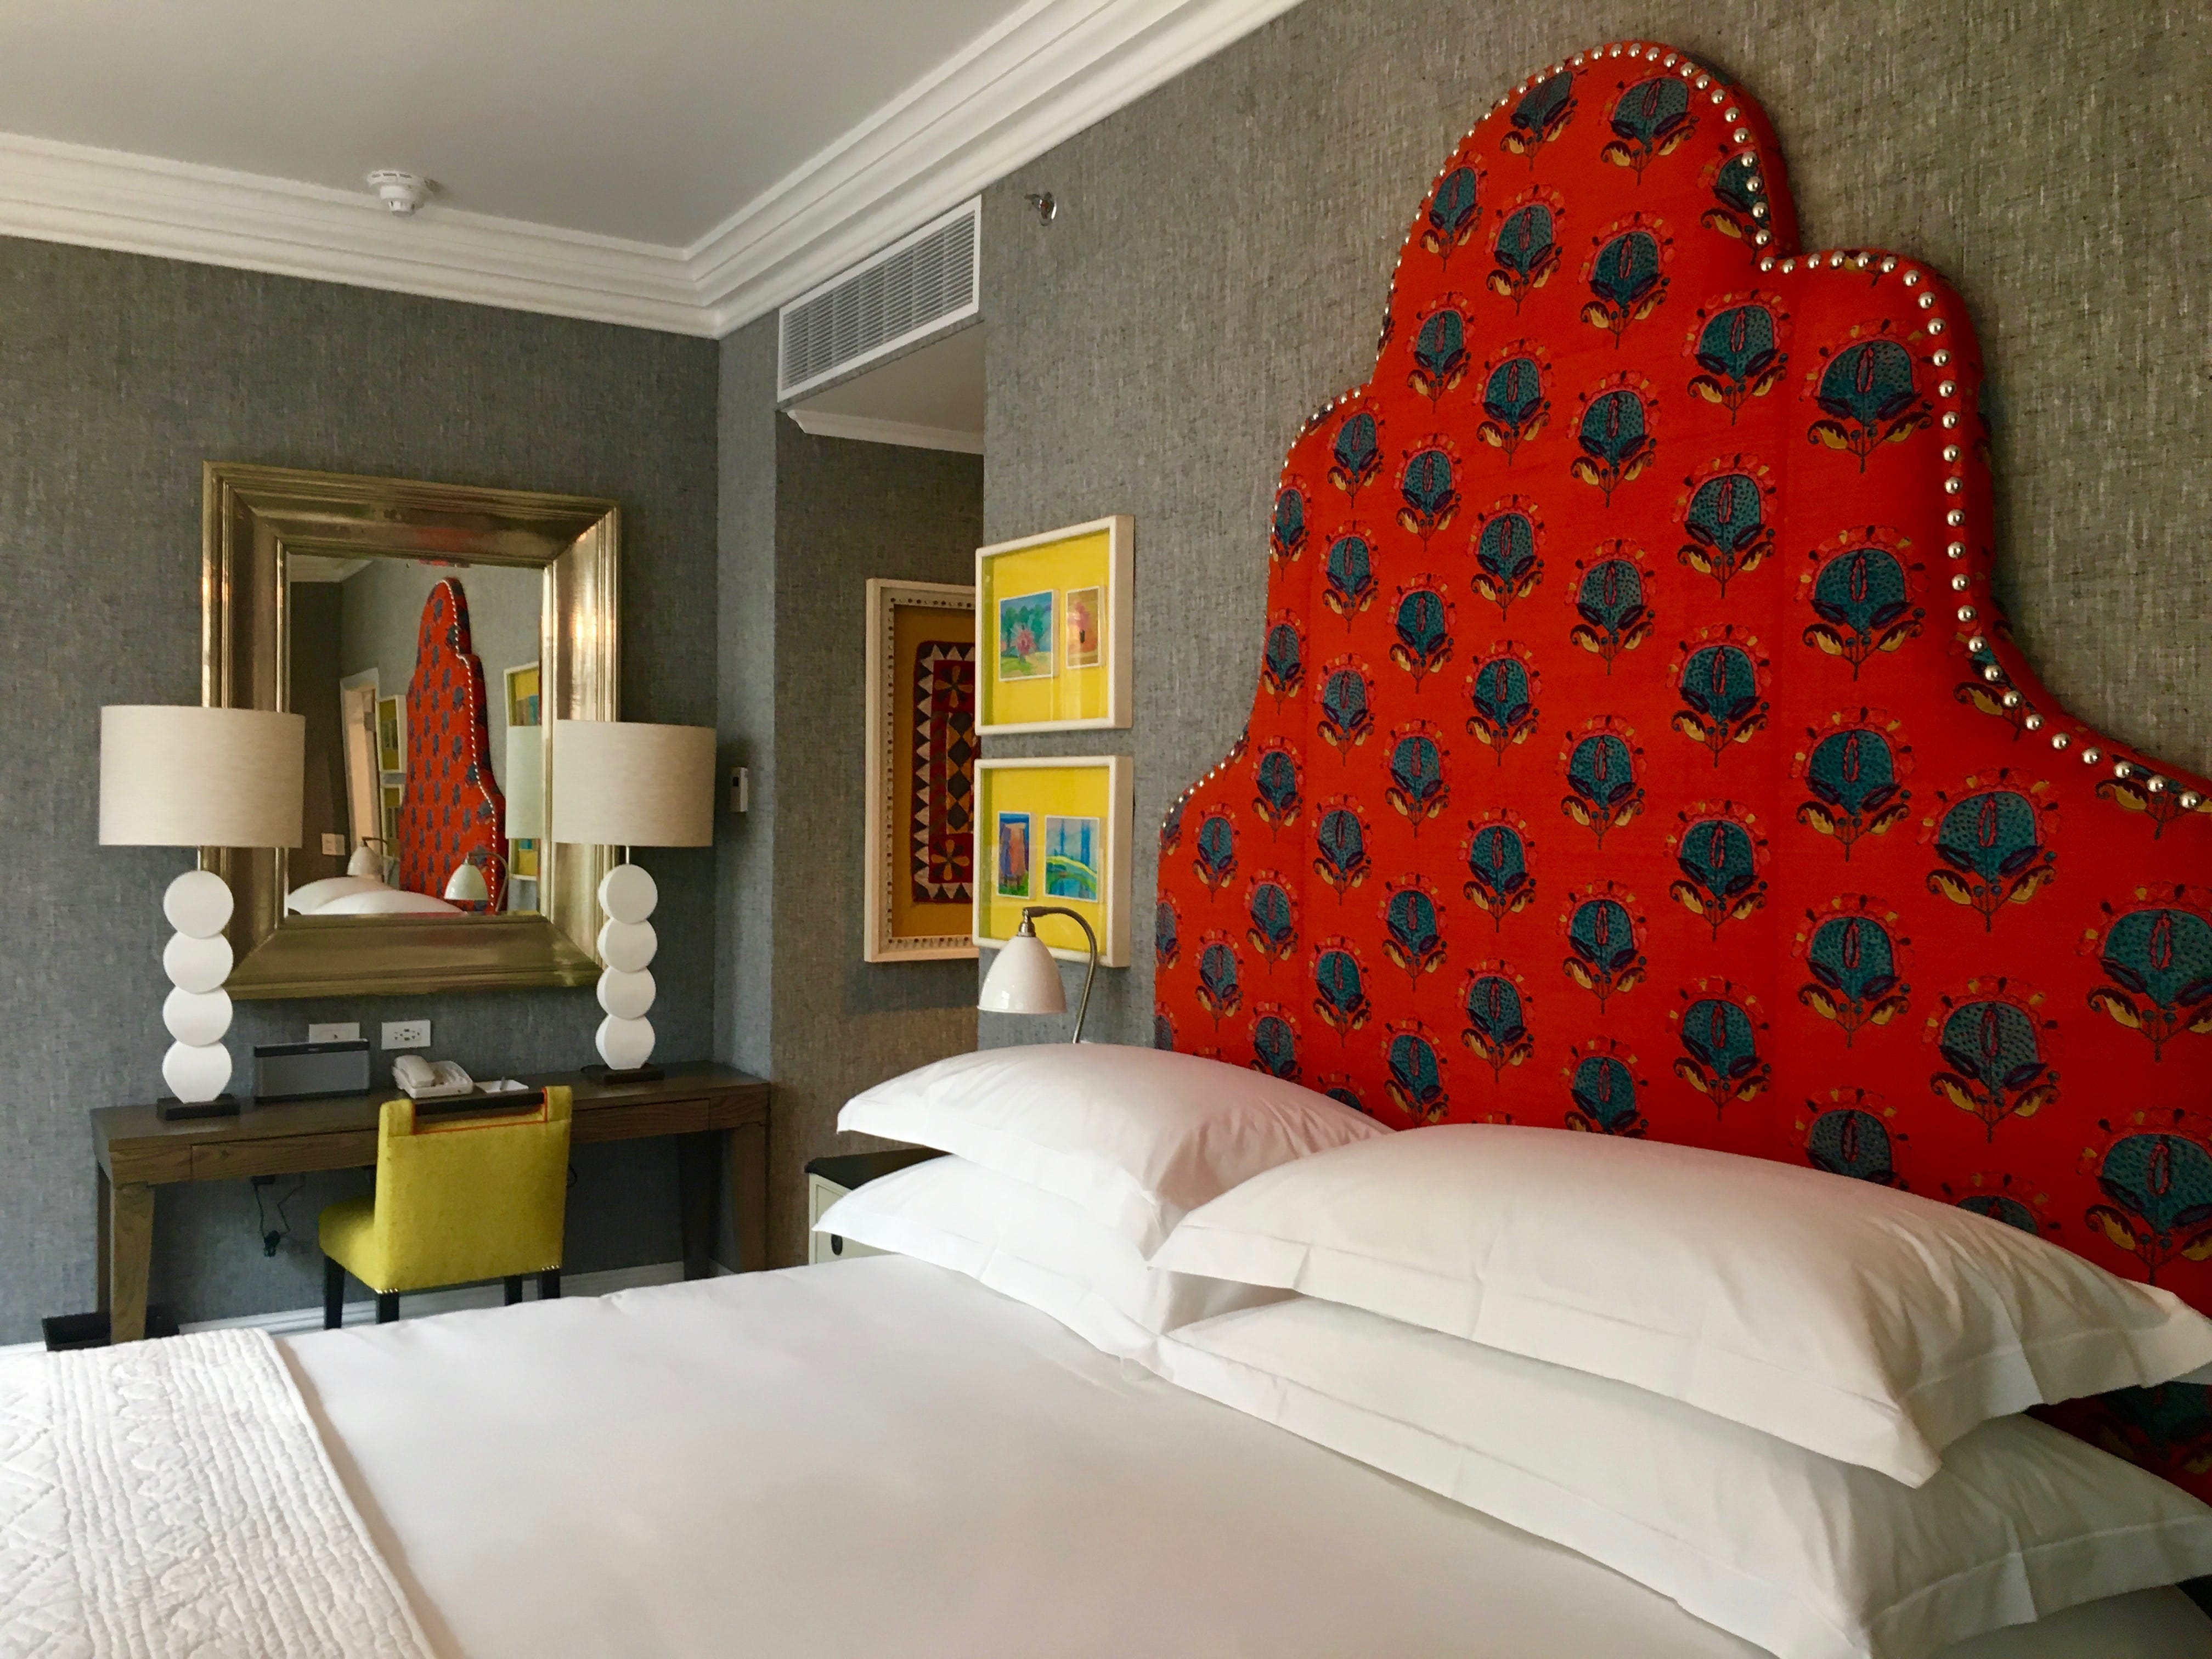 Inside Look: The Whitby Hotel, New York City